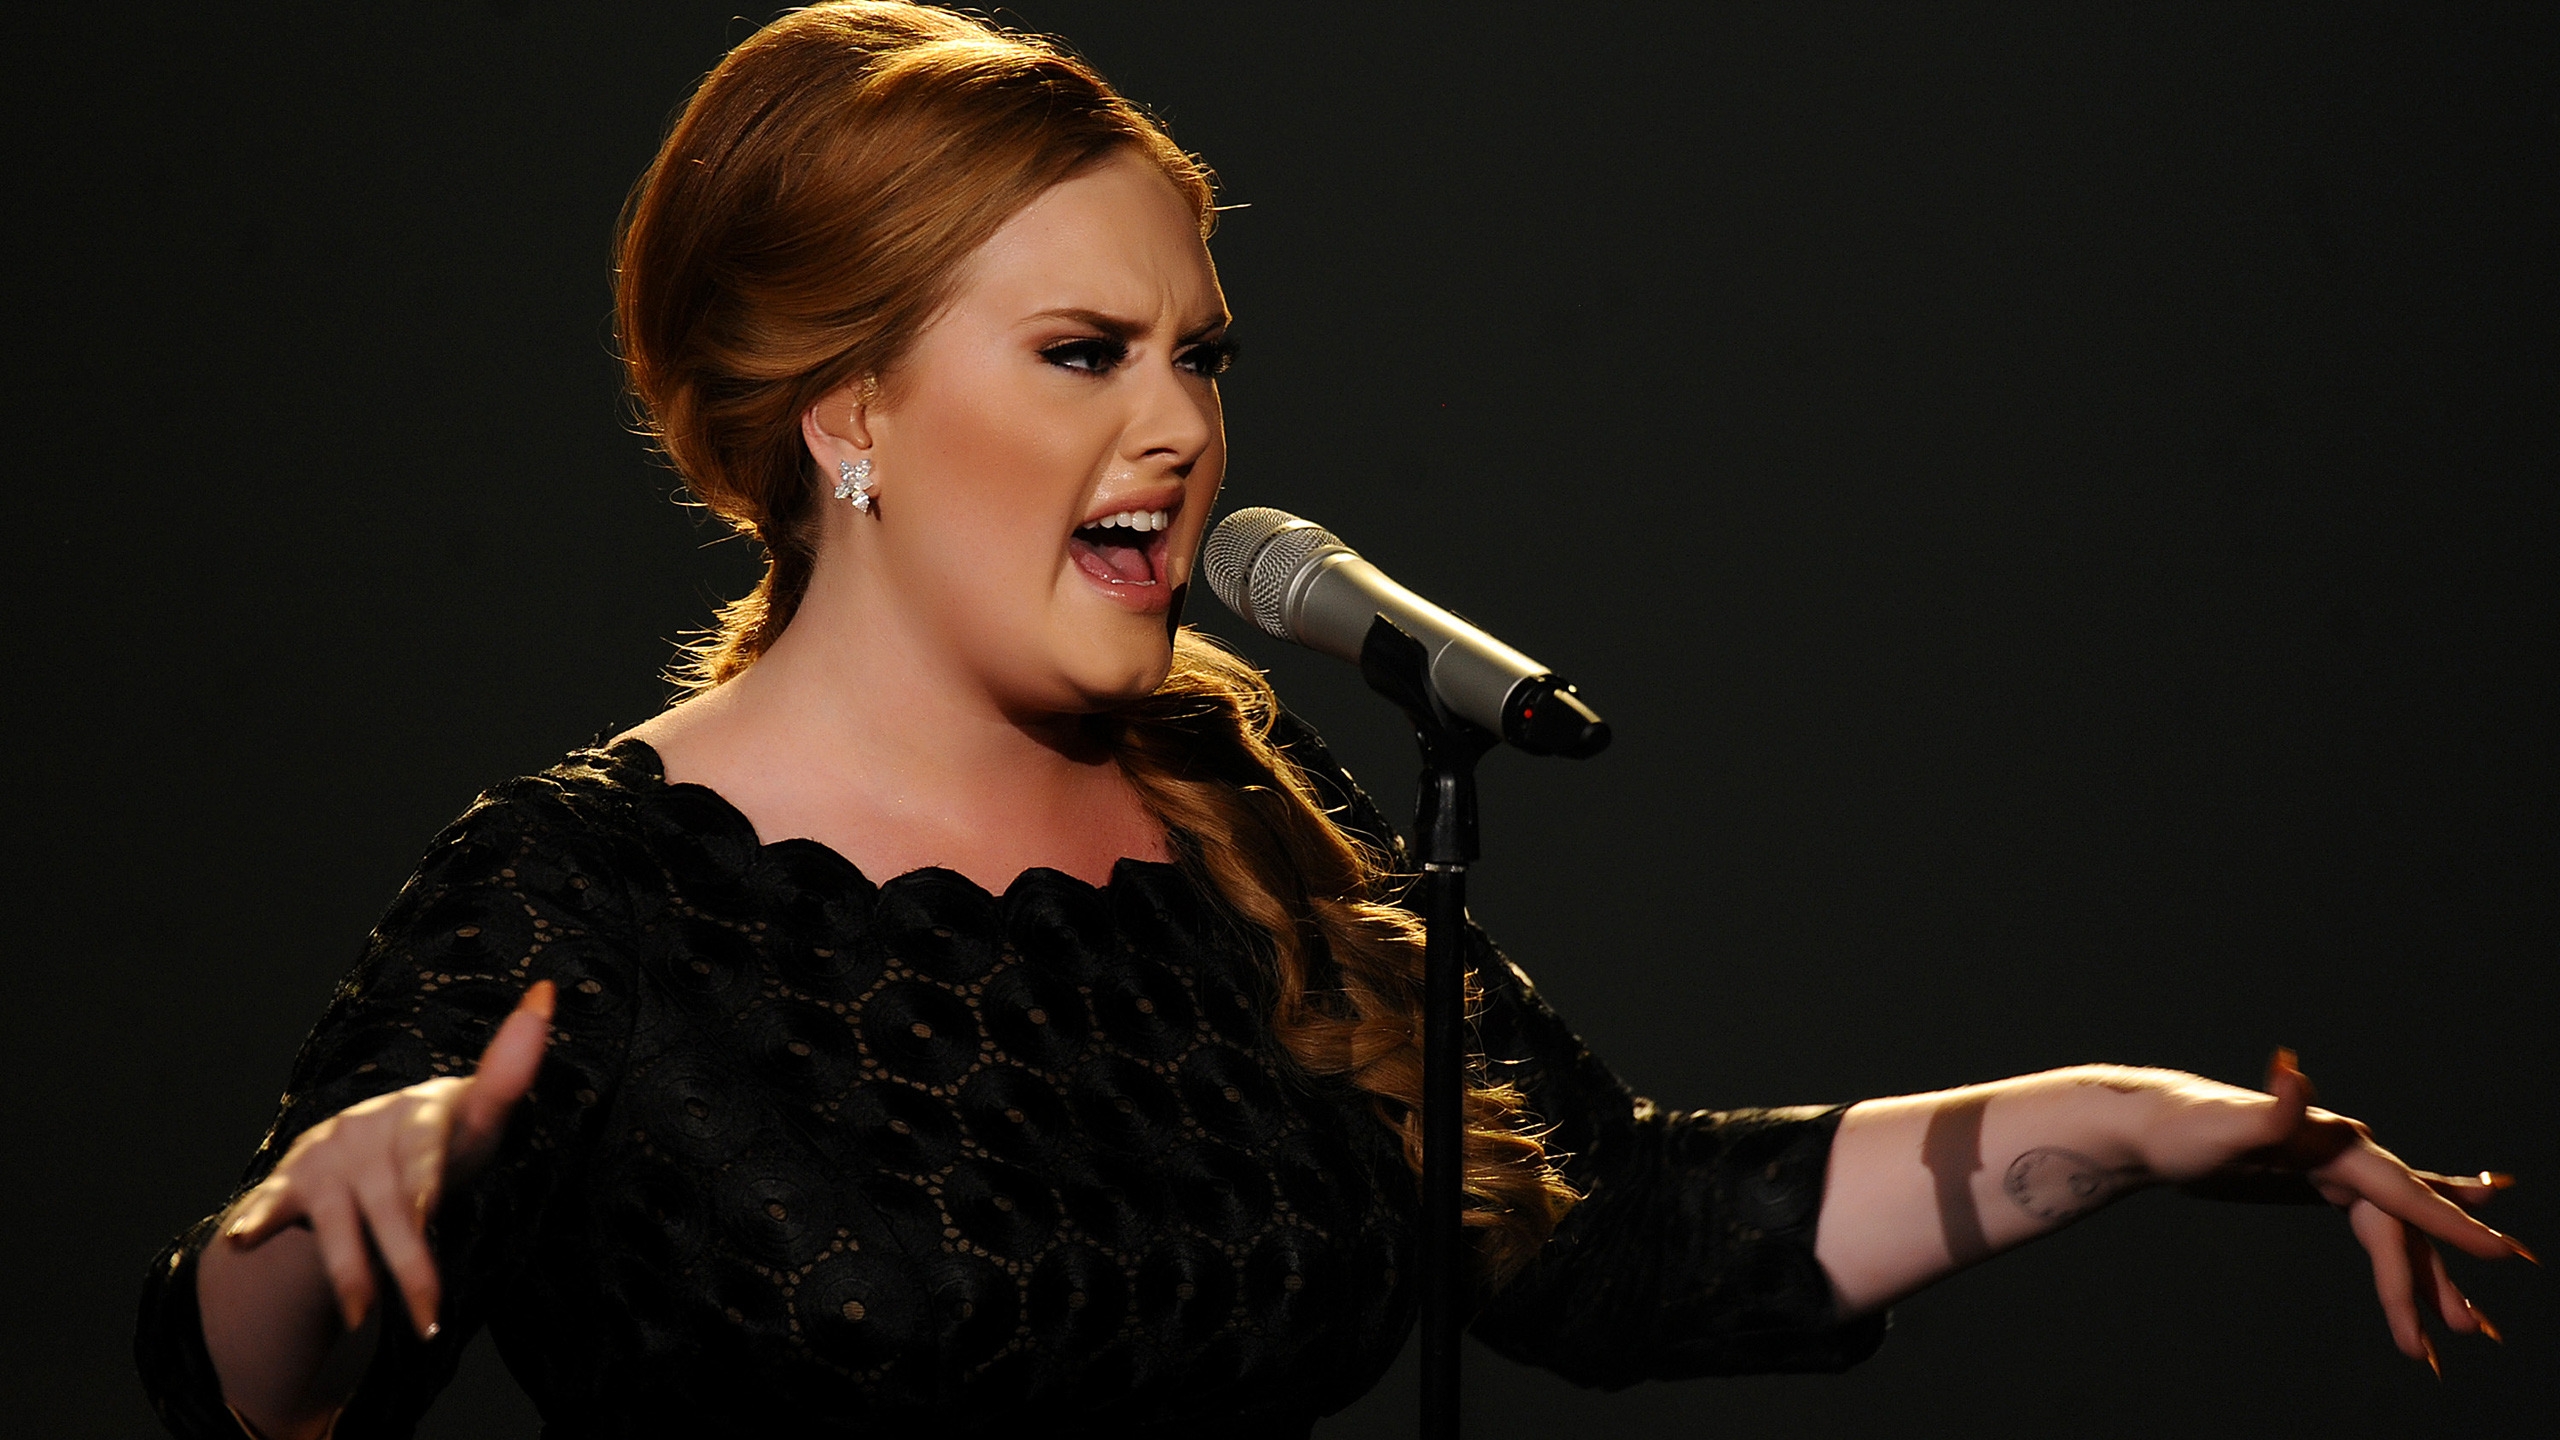 Adele Performing for 2560x1440 HDTV resolution